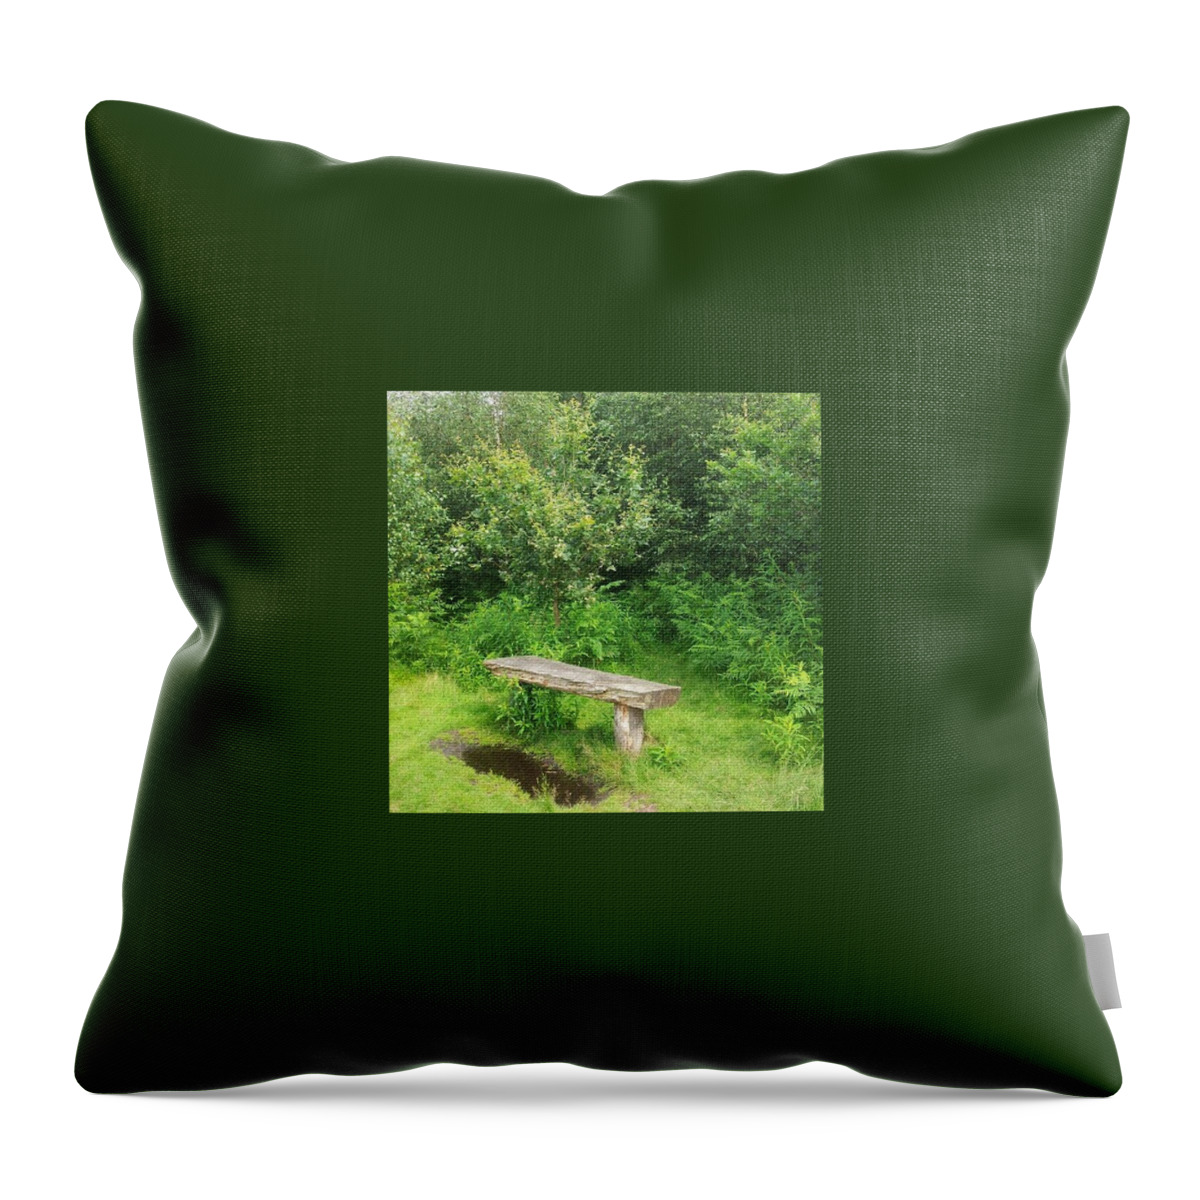  Throw Pillow featuring the photograph Take A Rest And Wash Your Feet by Abbie Shores